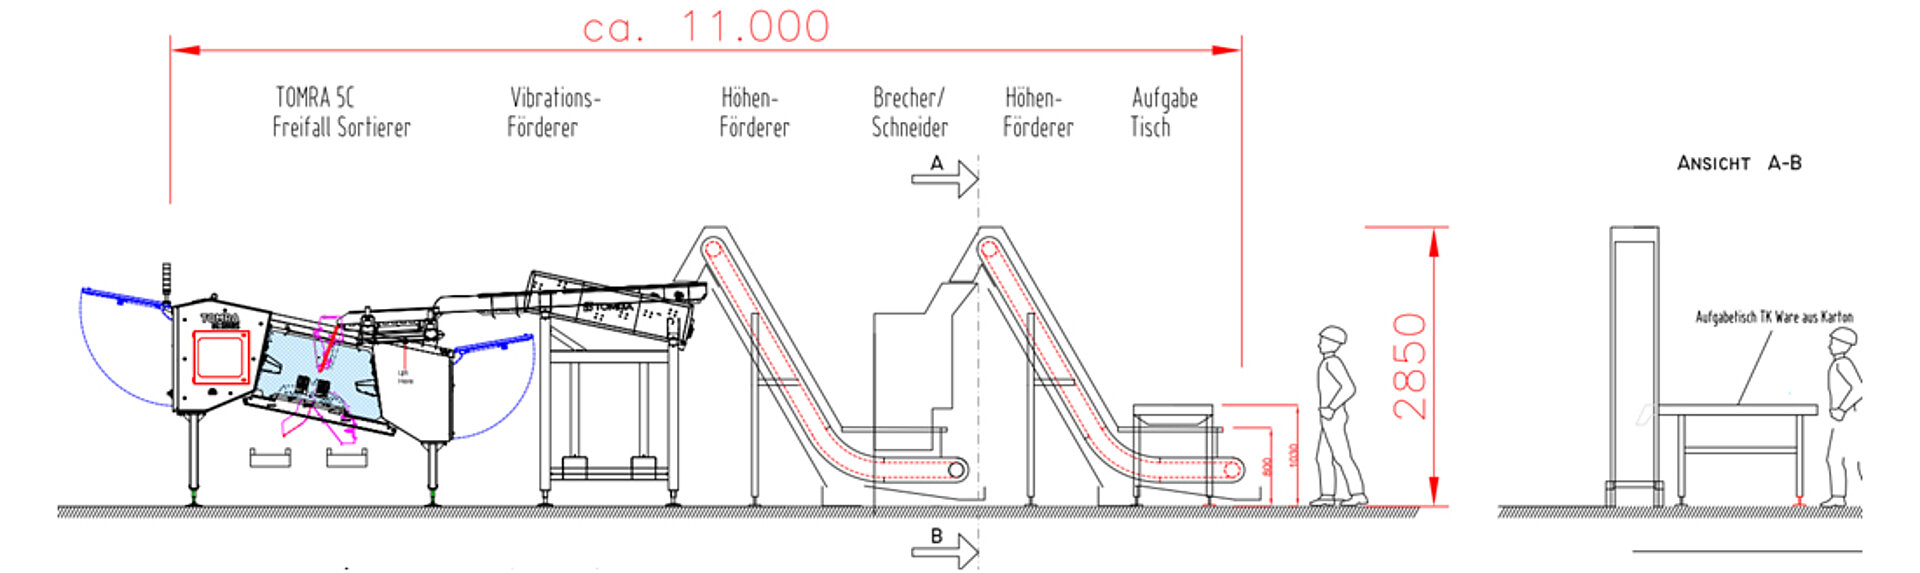 Elevators and height conveyors - Use in line